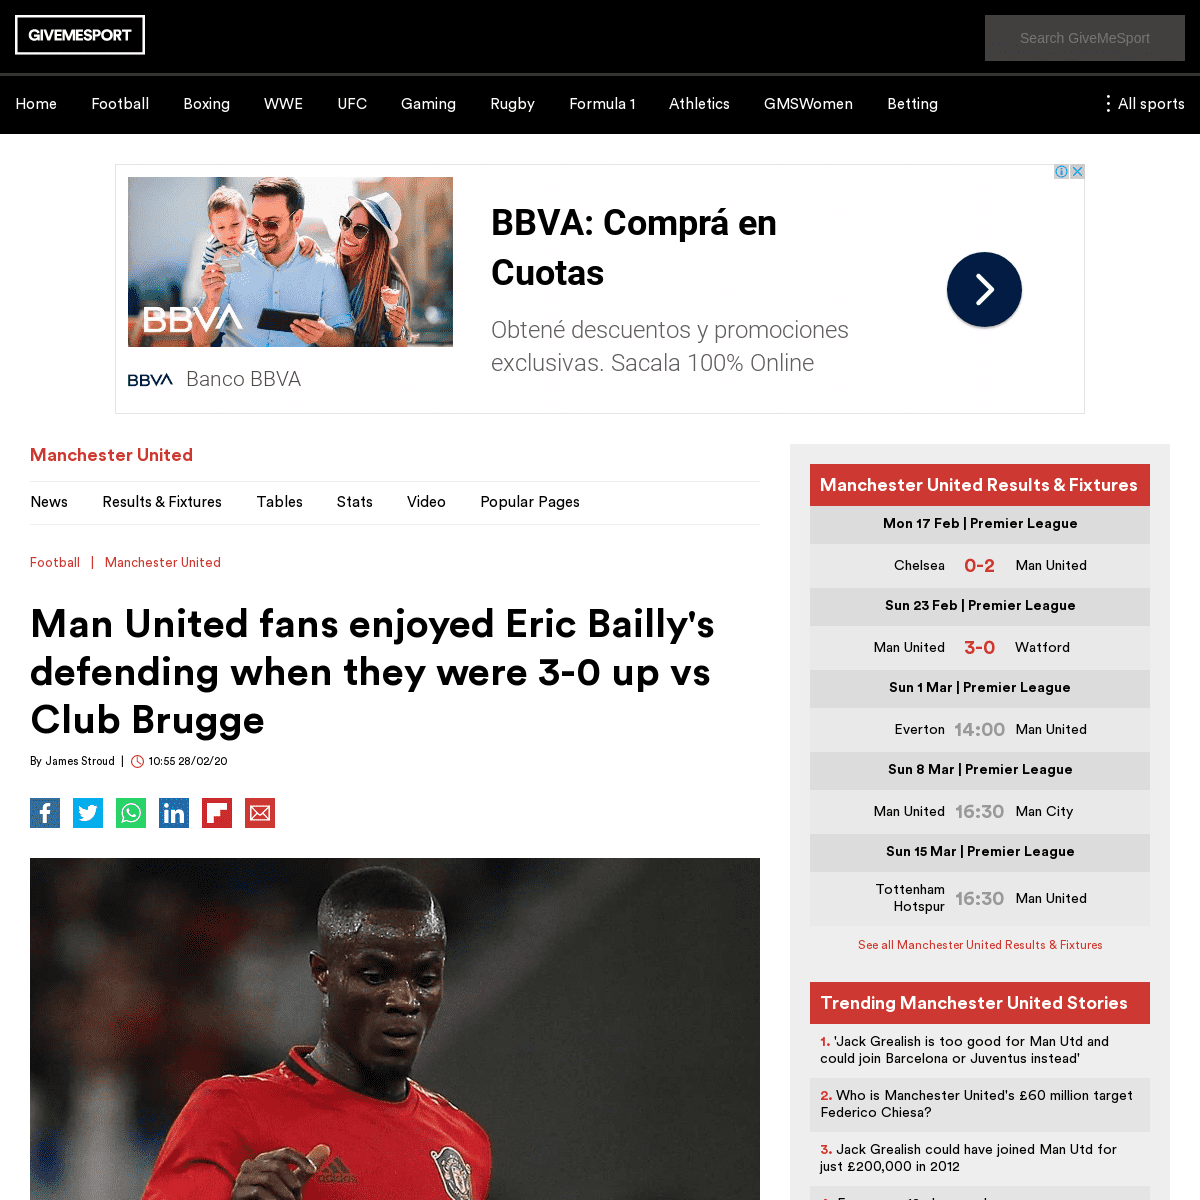 A complete backup of www.givemesport.com/1550755-man-united-fans-enjoyed-eric-baillys-defending-when-they-were-30-up-vs-club-bru